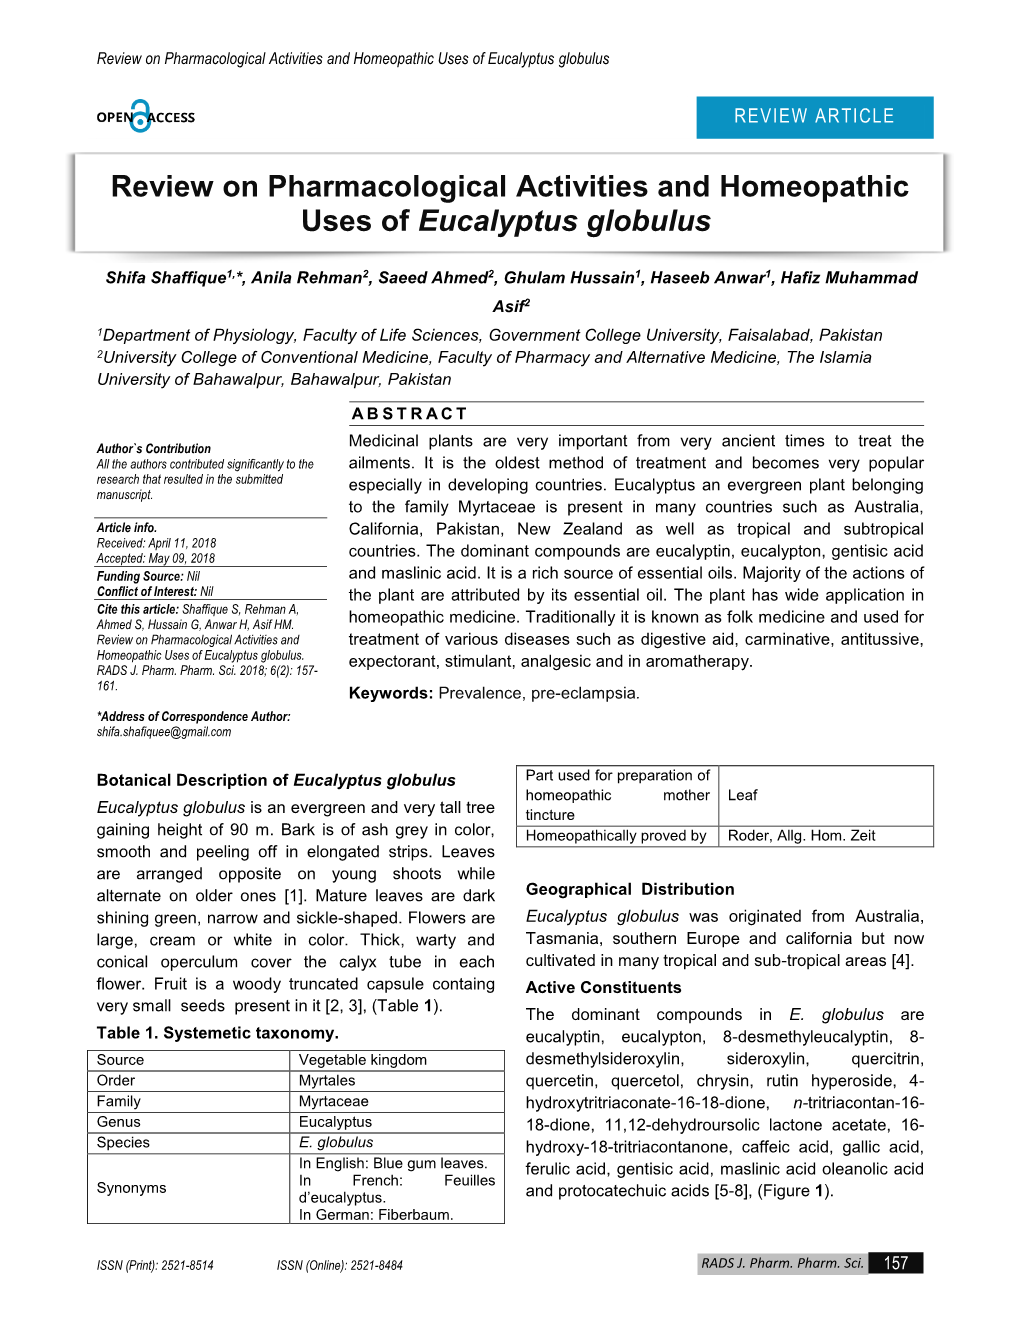 Review on Pharmacological Activities and Homeopathic Uses of Eucalyptus Globulus